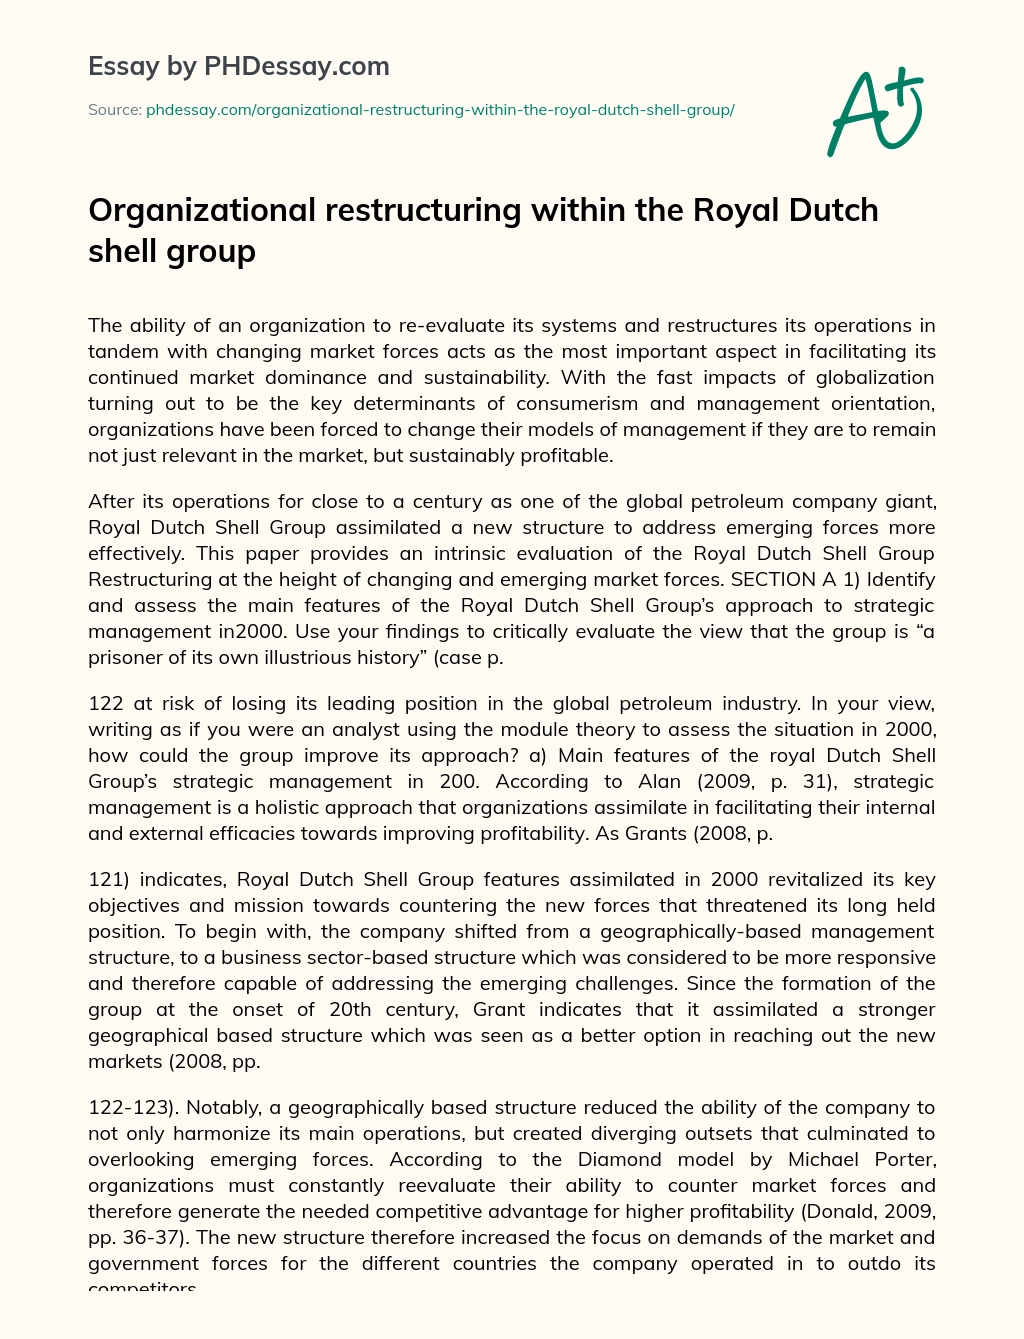 Organizational restructuring within the Royal Dutch shell group essay